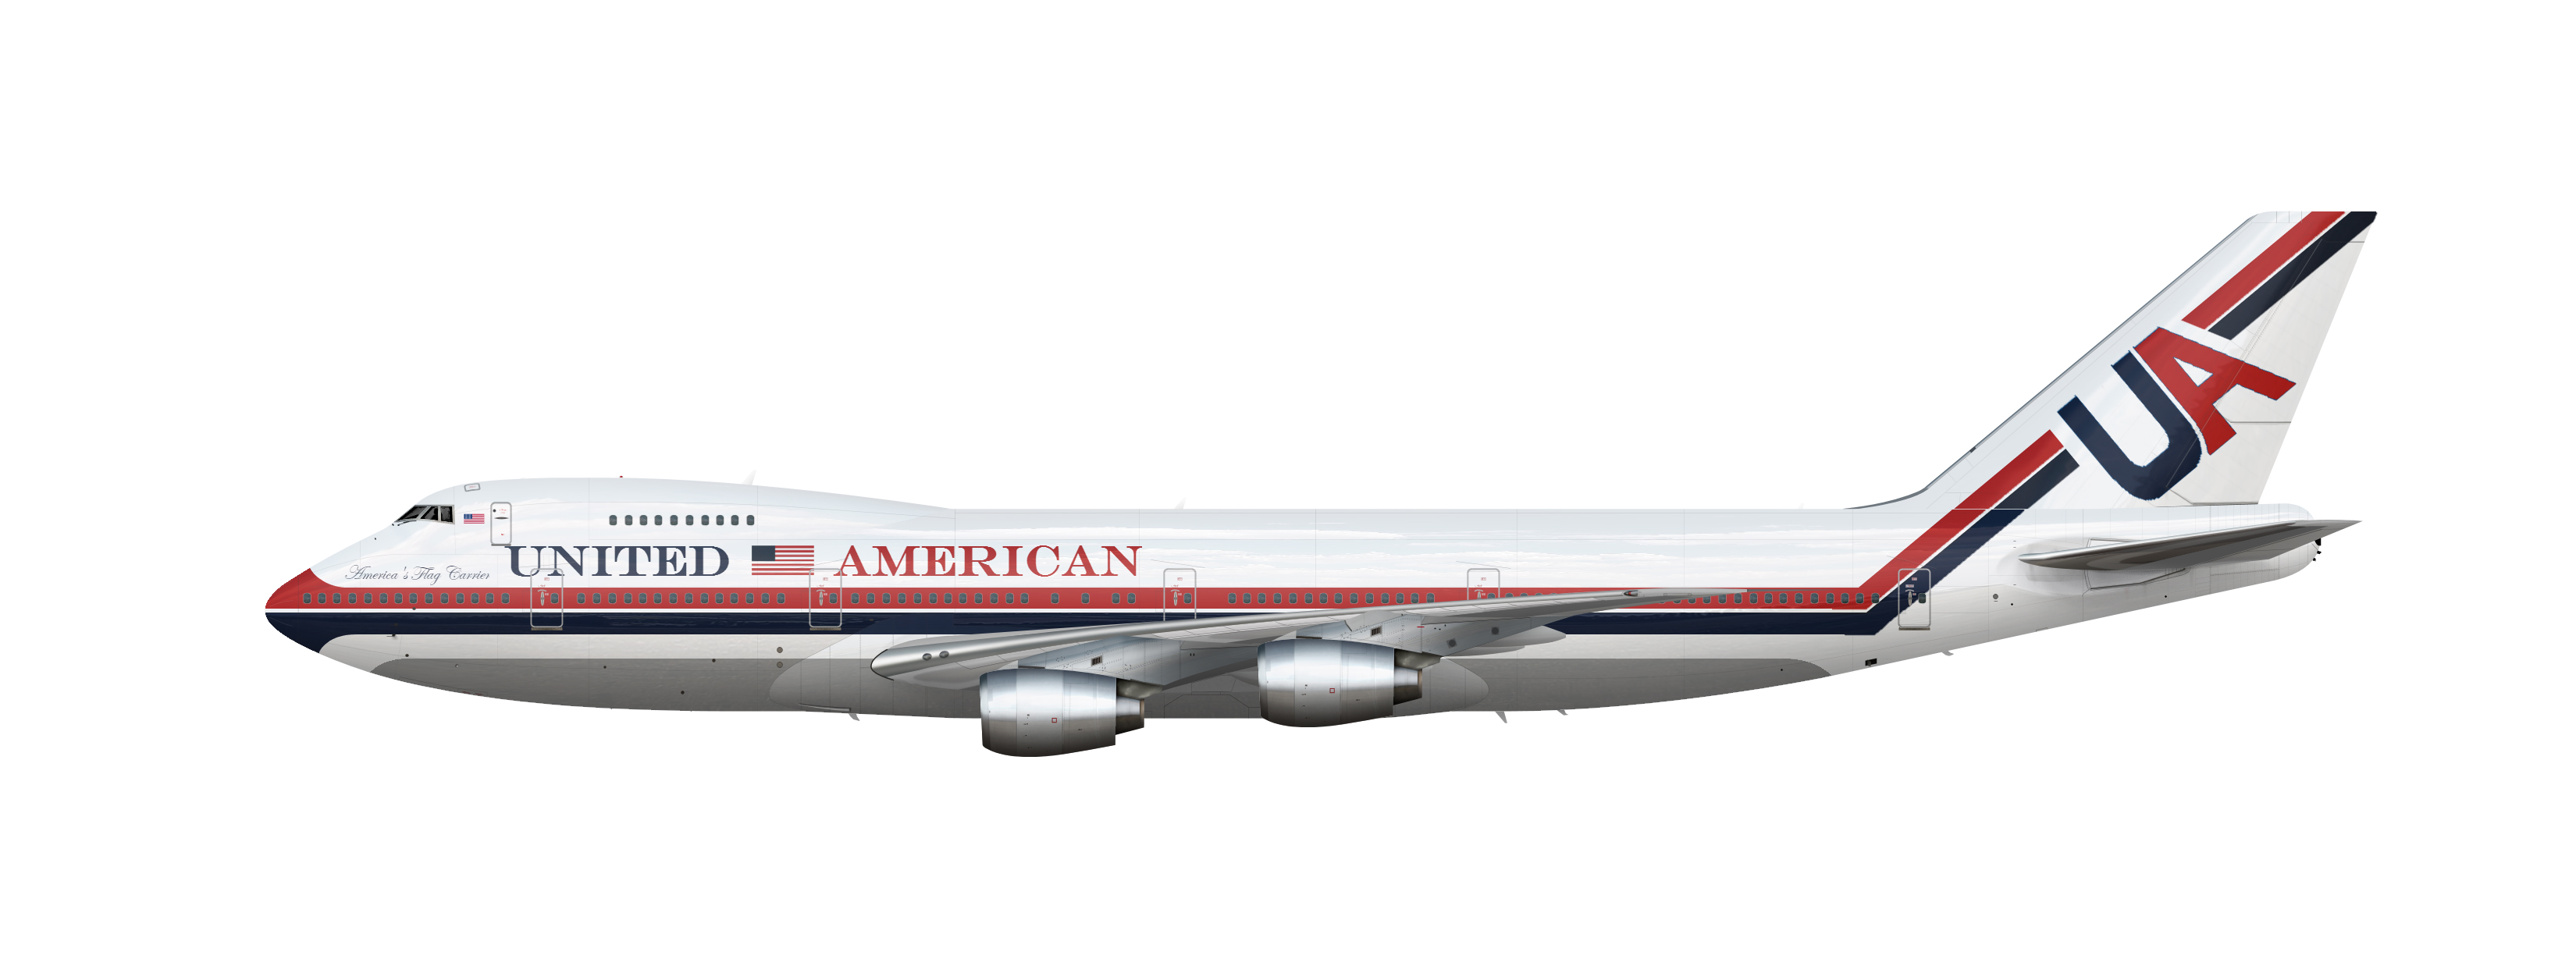 B747-200 1975-1983 - United American - Gallery - Airline Empires